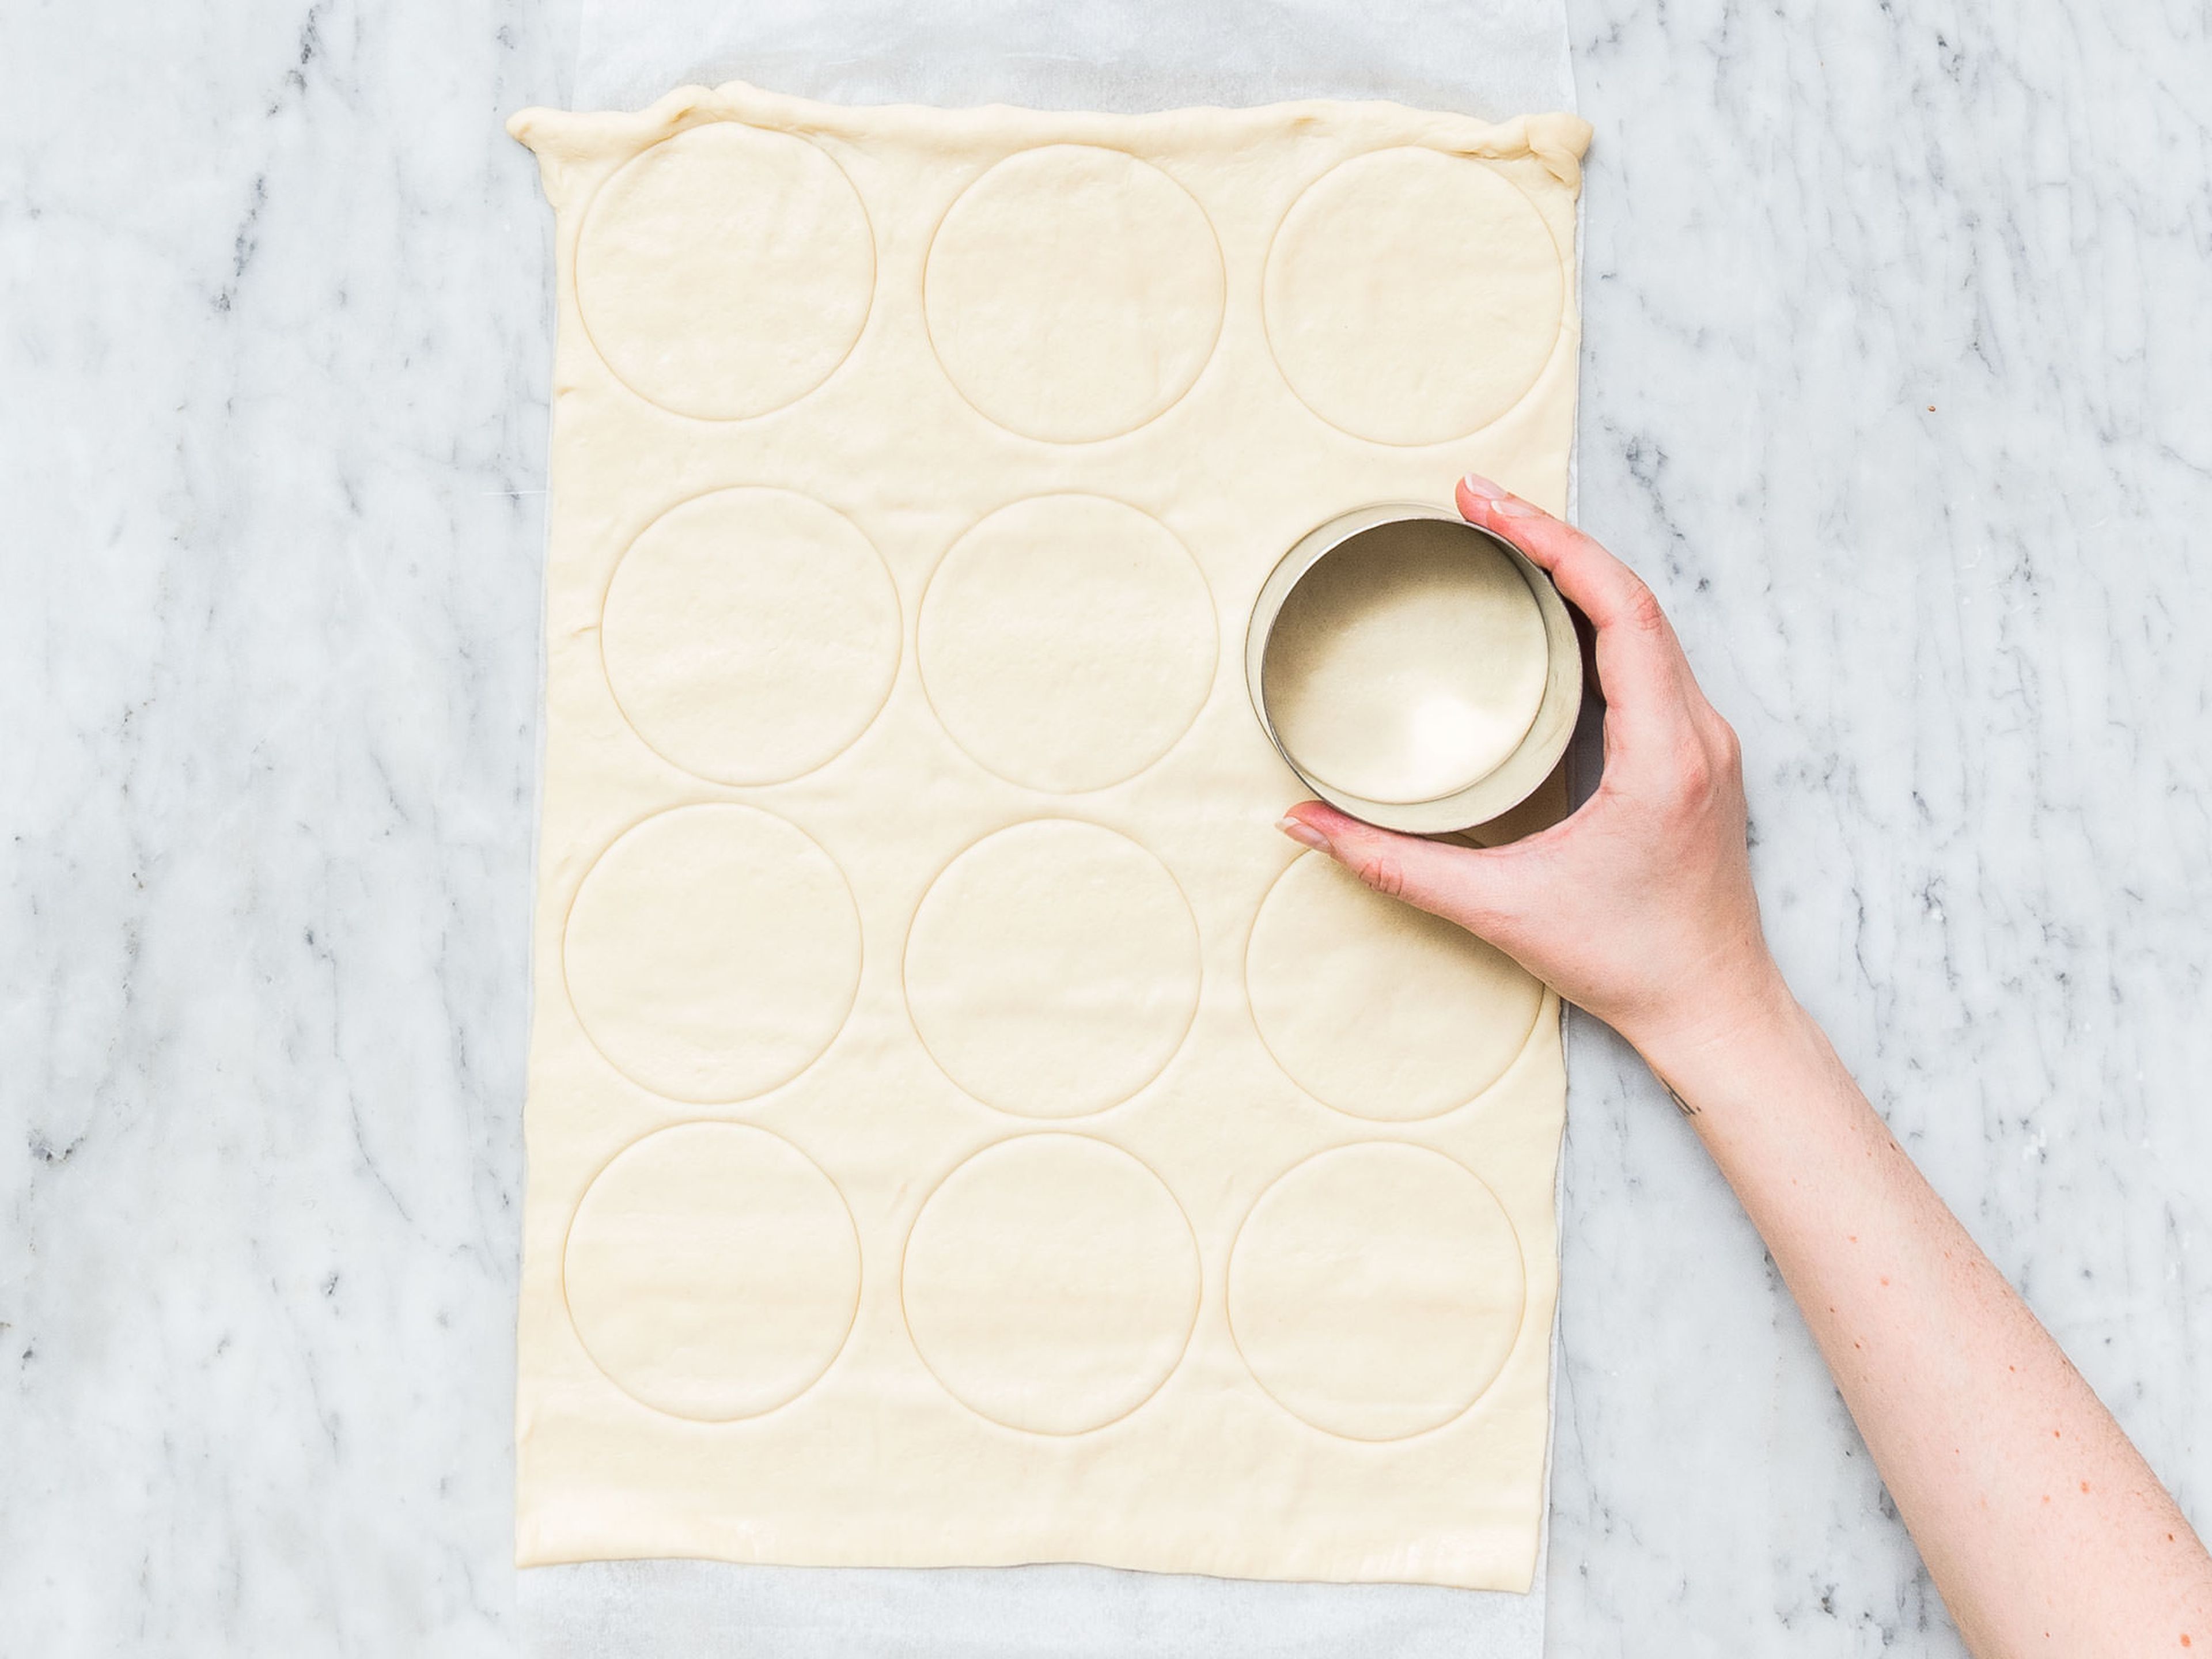 Slice tomatoes and grate Gruyère cheese. Roll out pizza dough and an even number of equal-sized circles using the cookie cutter.